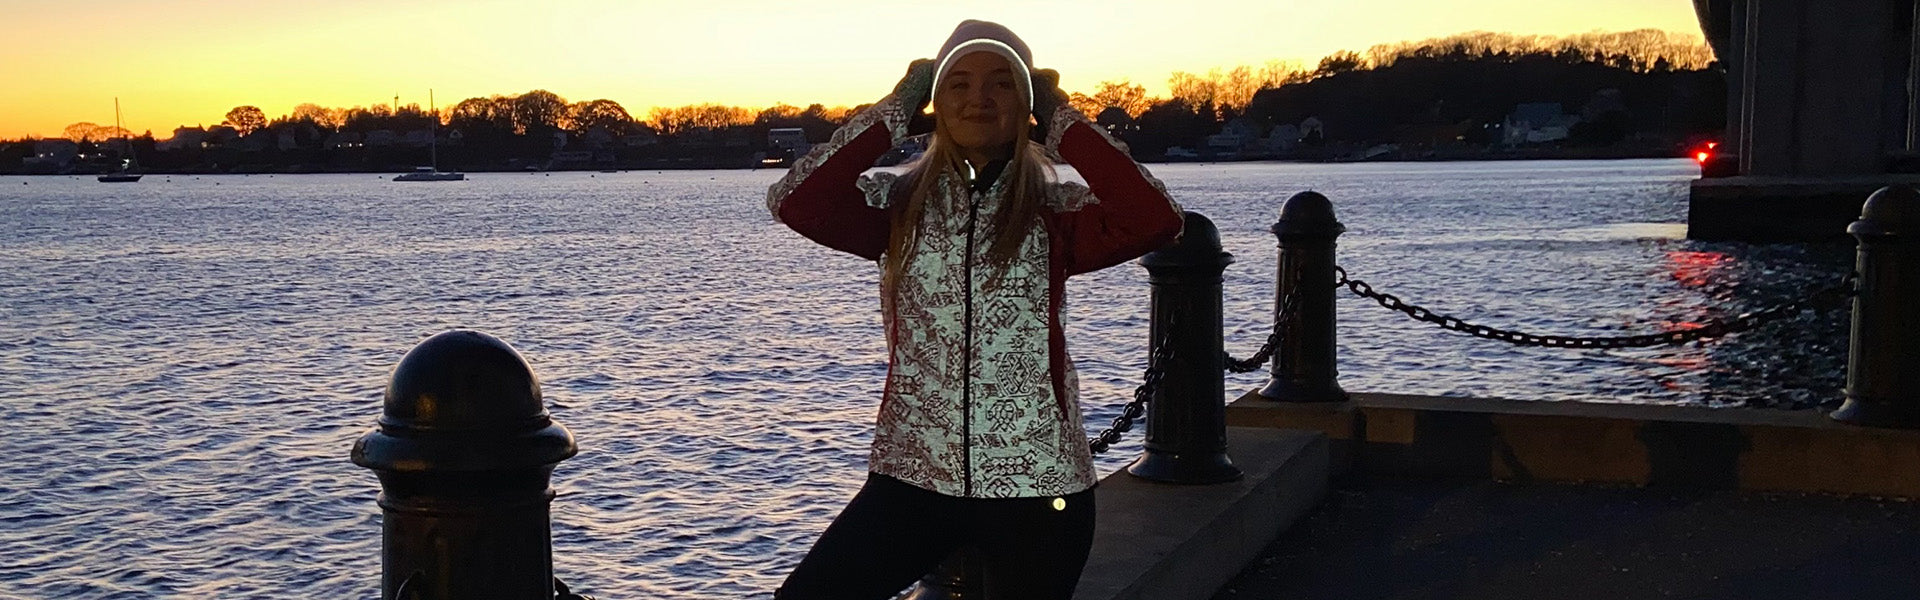 A woman standing on a pier at twilight. She is wearing a reflective running jacket and a reflective knit cap.